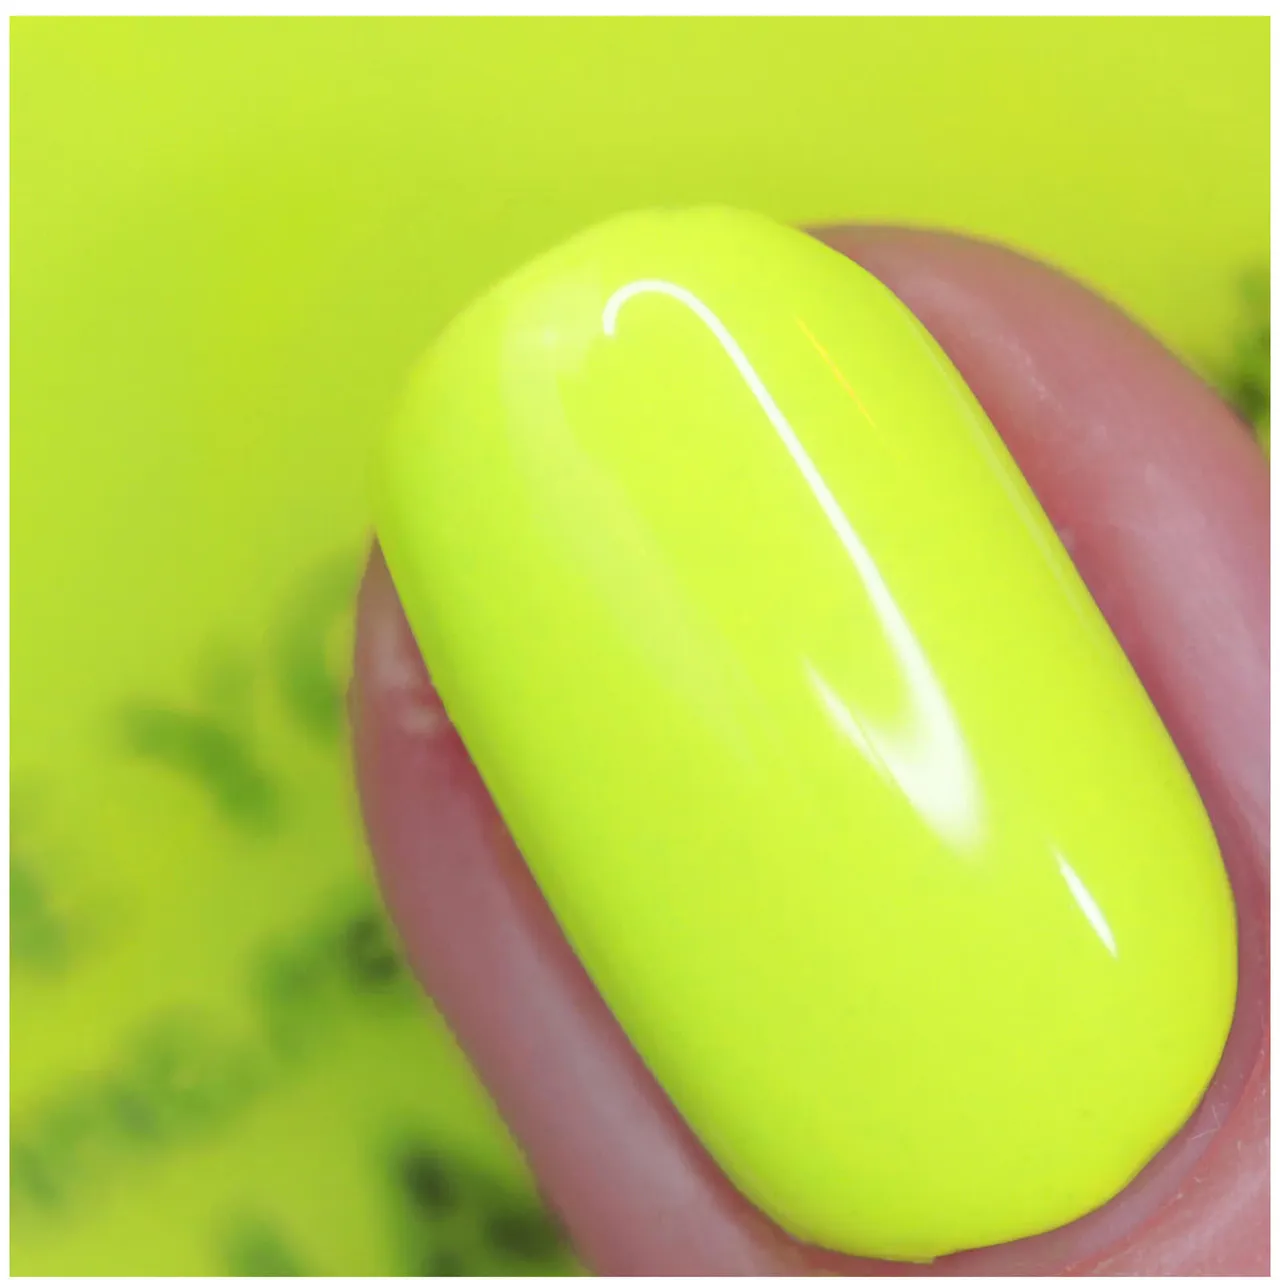 nails inc. Naked in Neon Quad 4 x 14ml